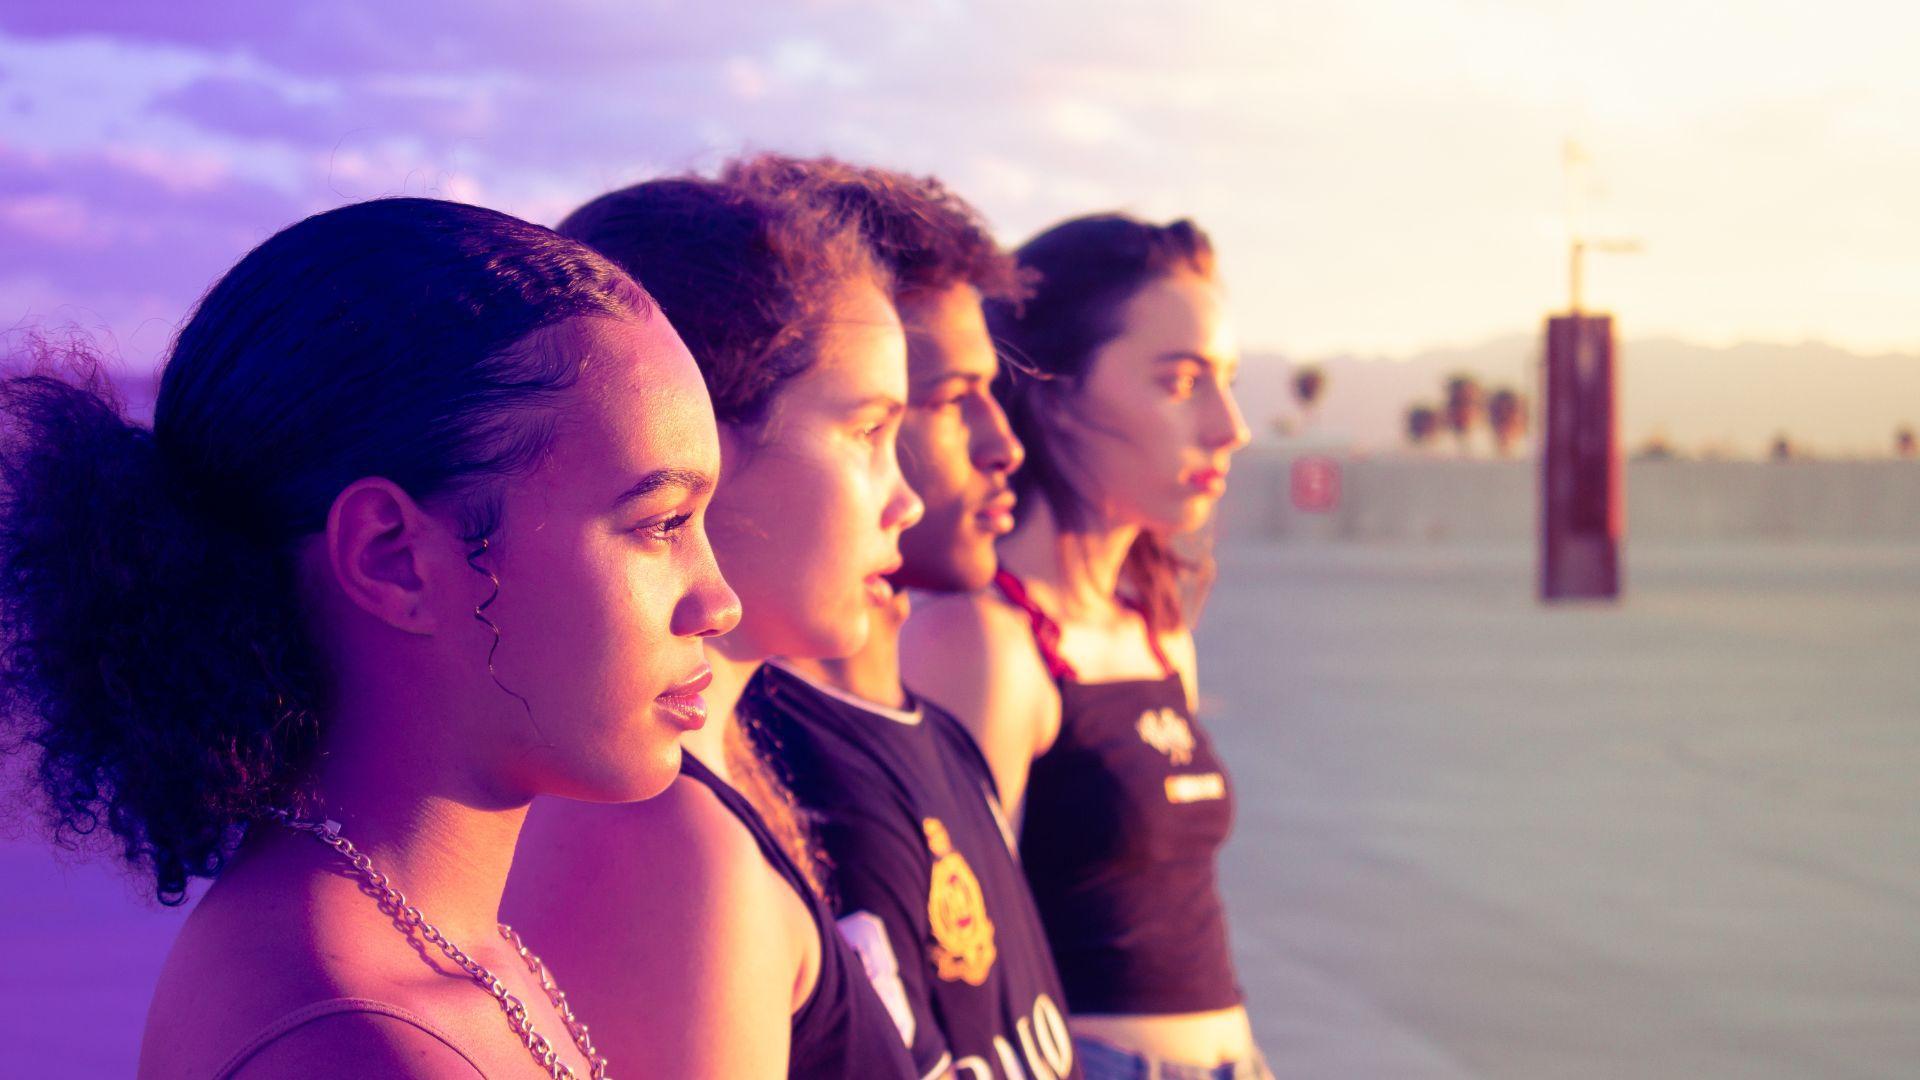 A group of four young individuals gazing into the distance during sunset, with their profiles illuminated by the warm, golden light